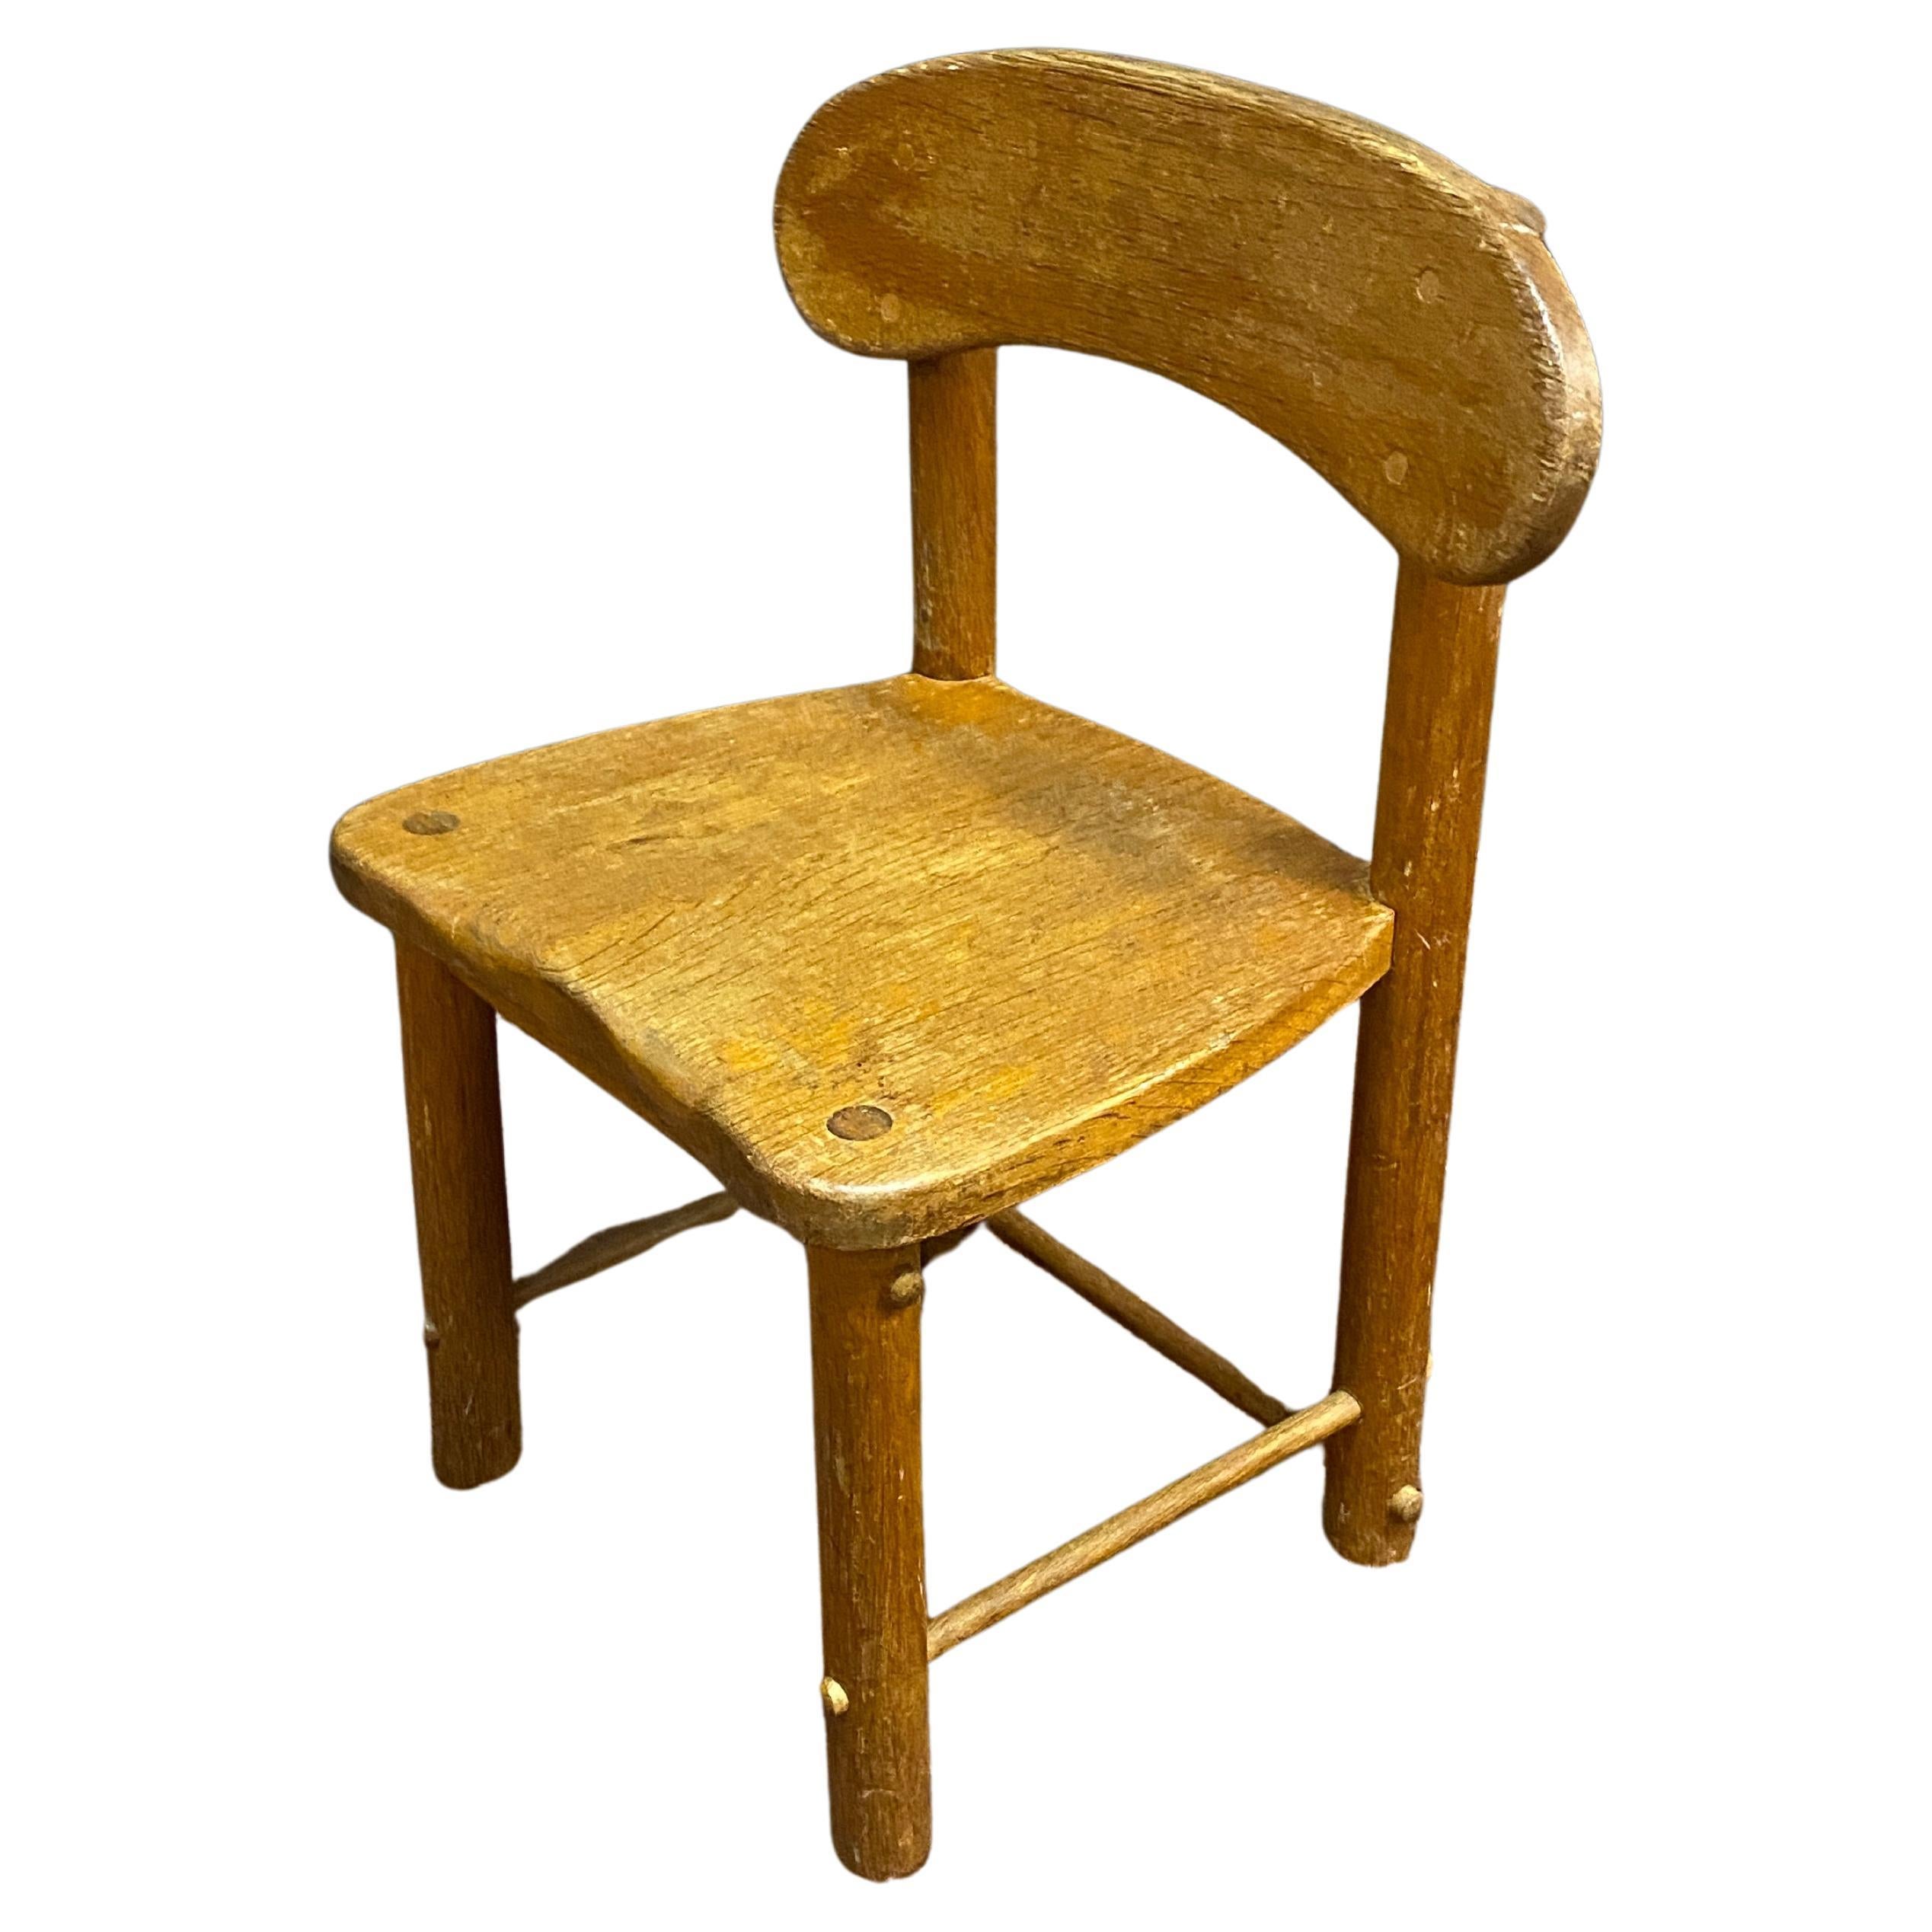 Pierre GAUTIER DELAYE (in the style of), small child's chair circa 1950/1960